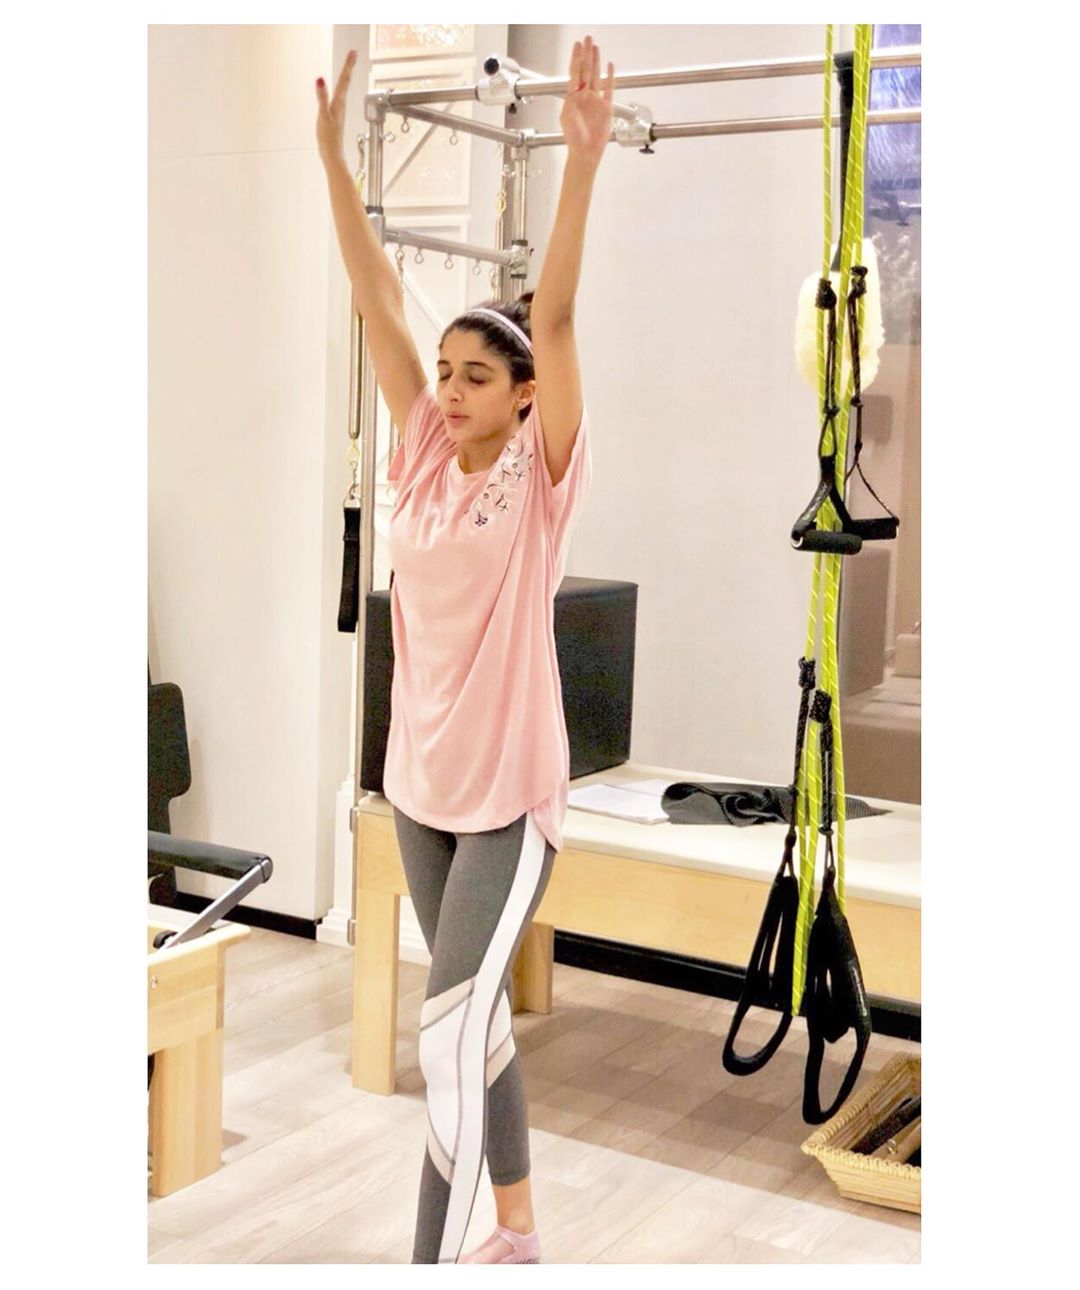 Pictures of Actress Mawra Hocane Workout in Gym